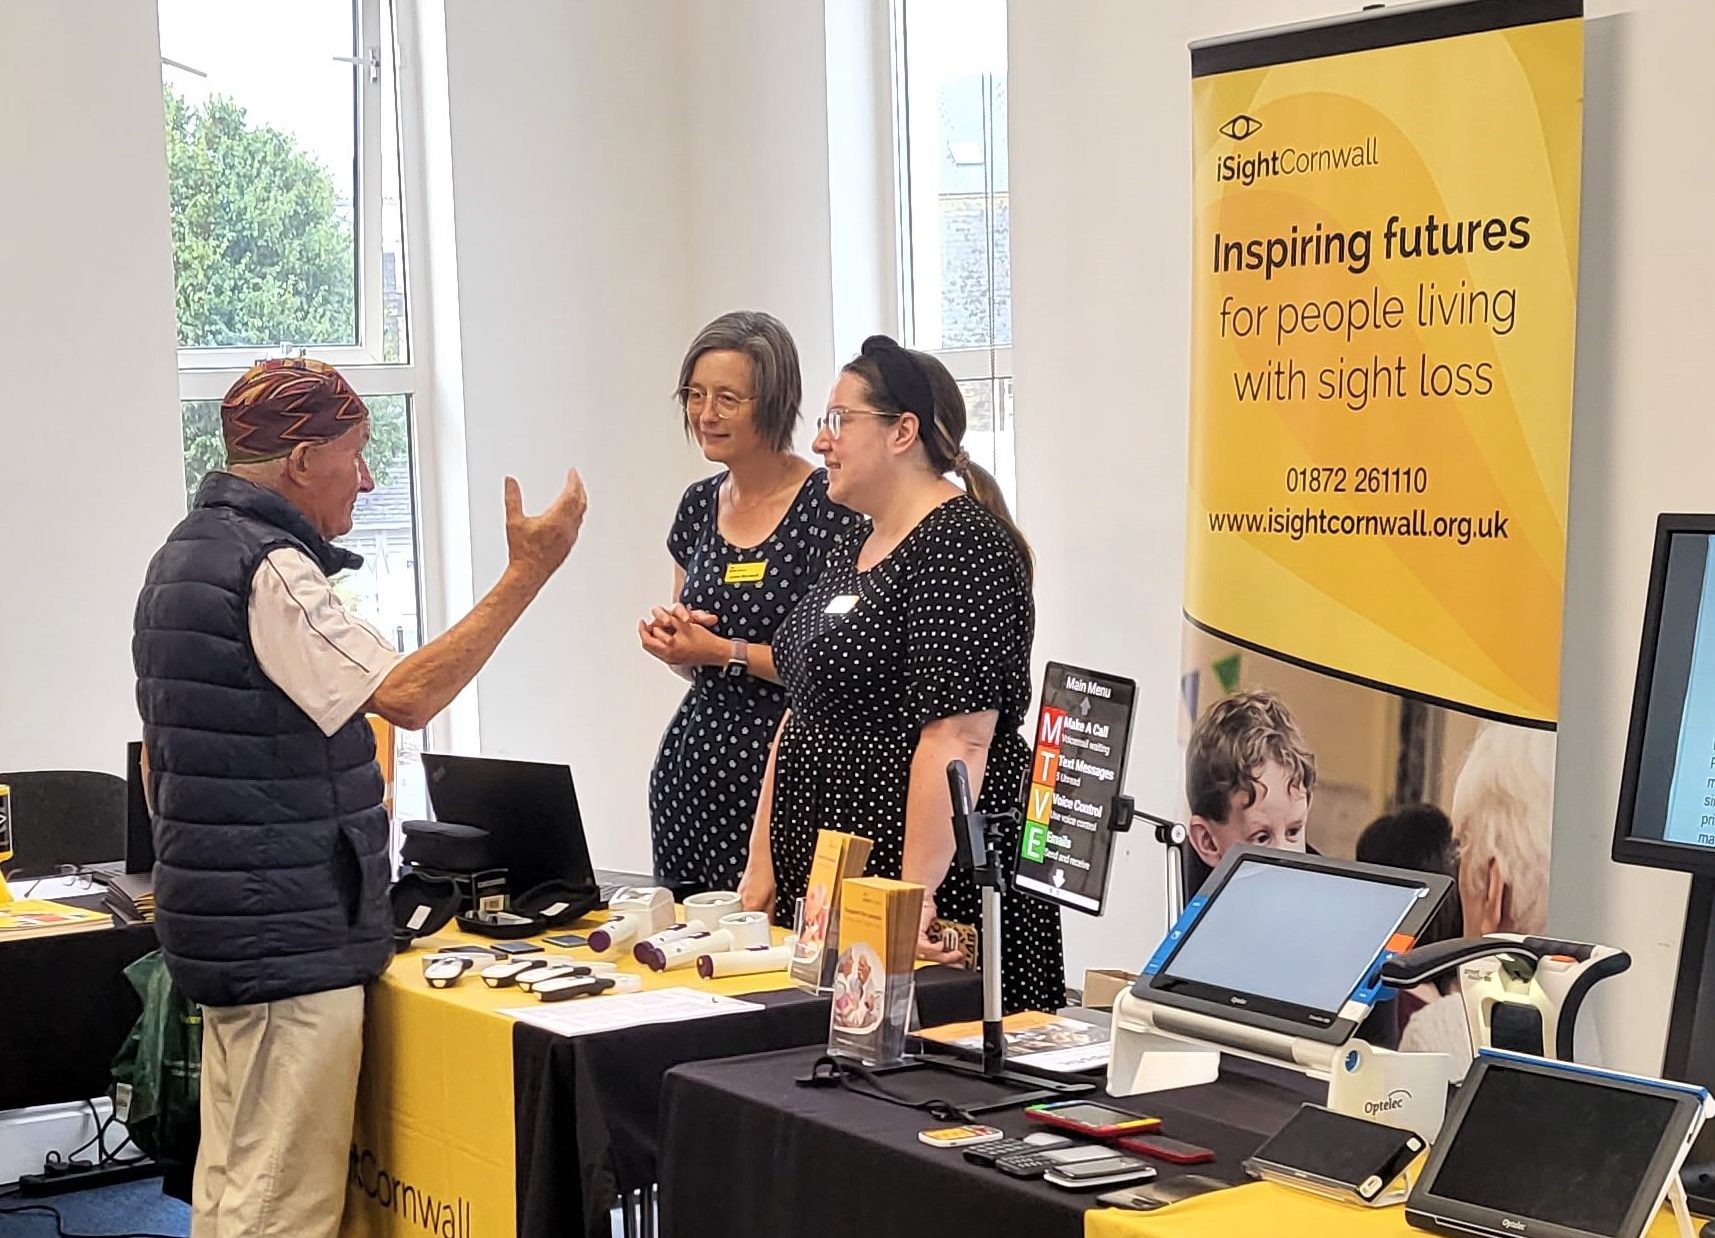 Two women stand behind an iSightCornwall branded table. They listen intently to a man in front of them who is gesturing to the magnifiers on the table.